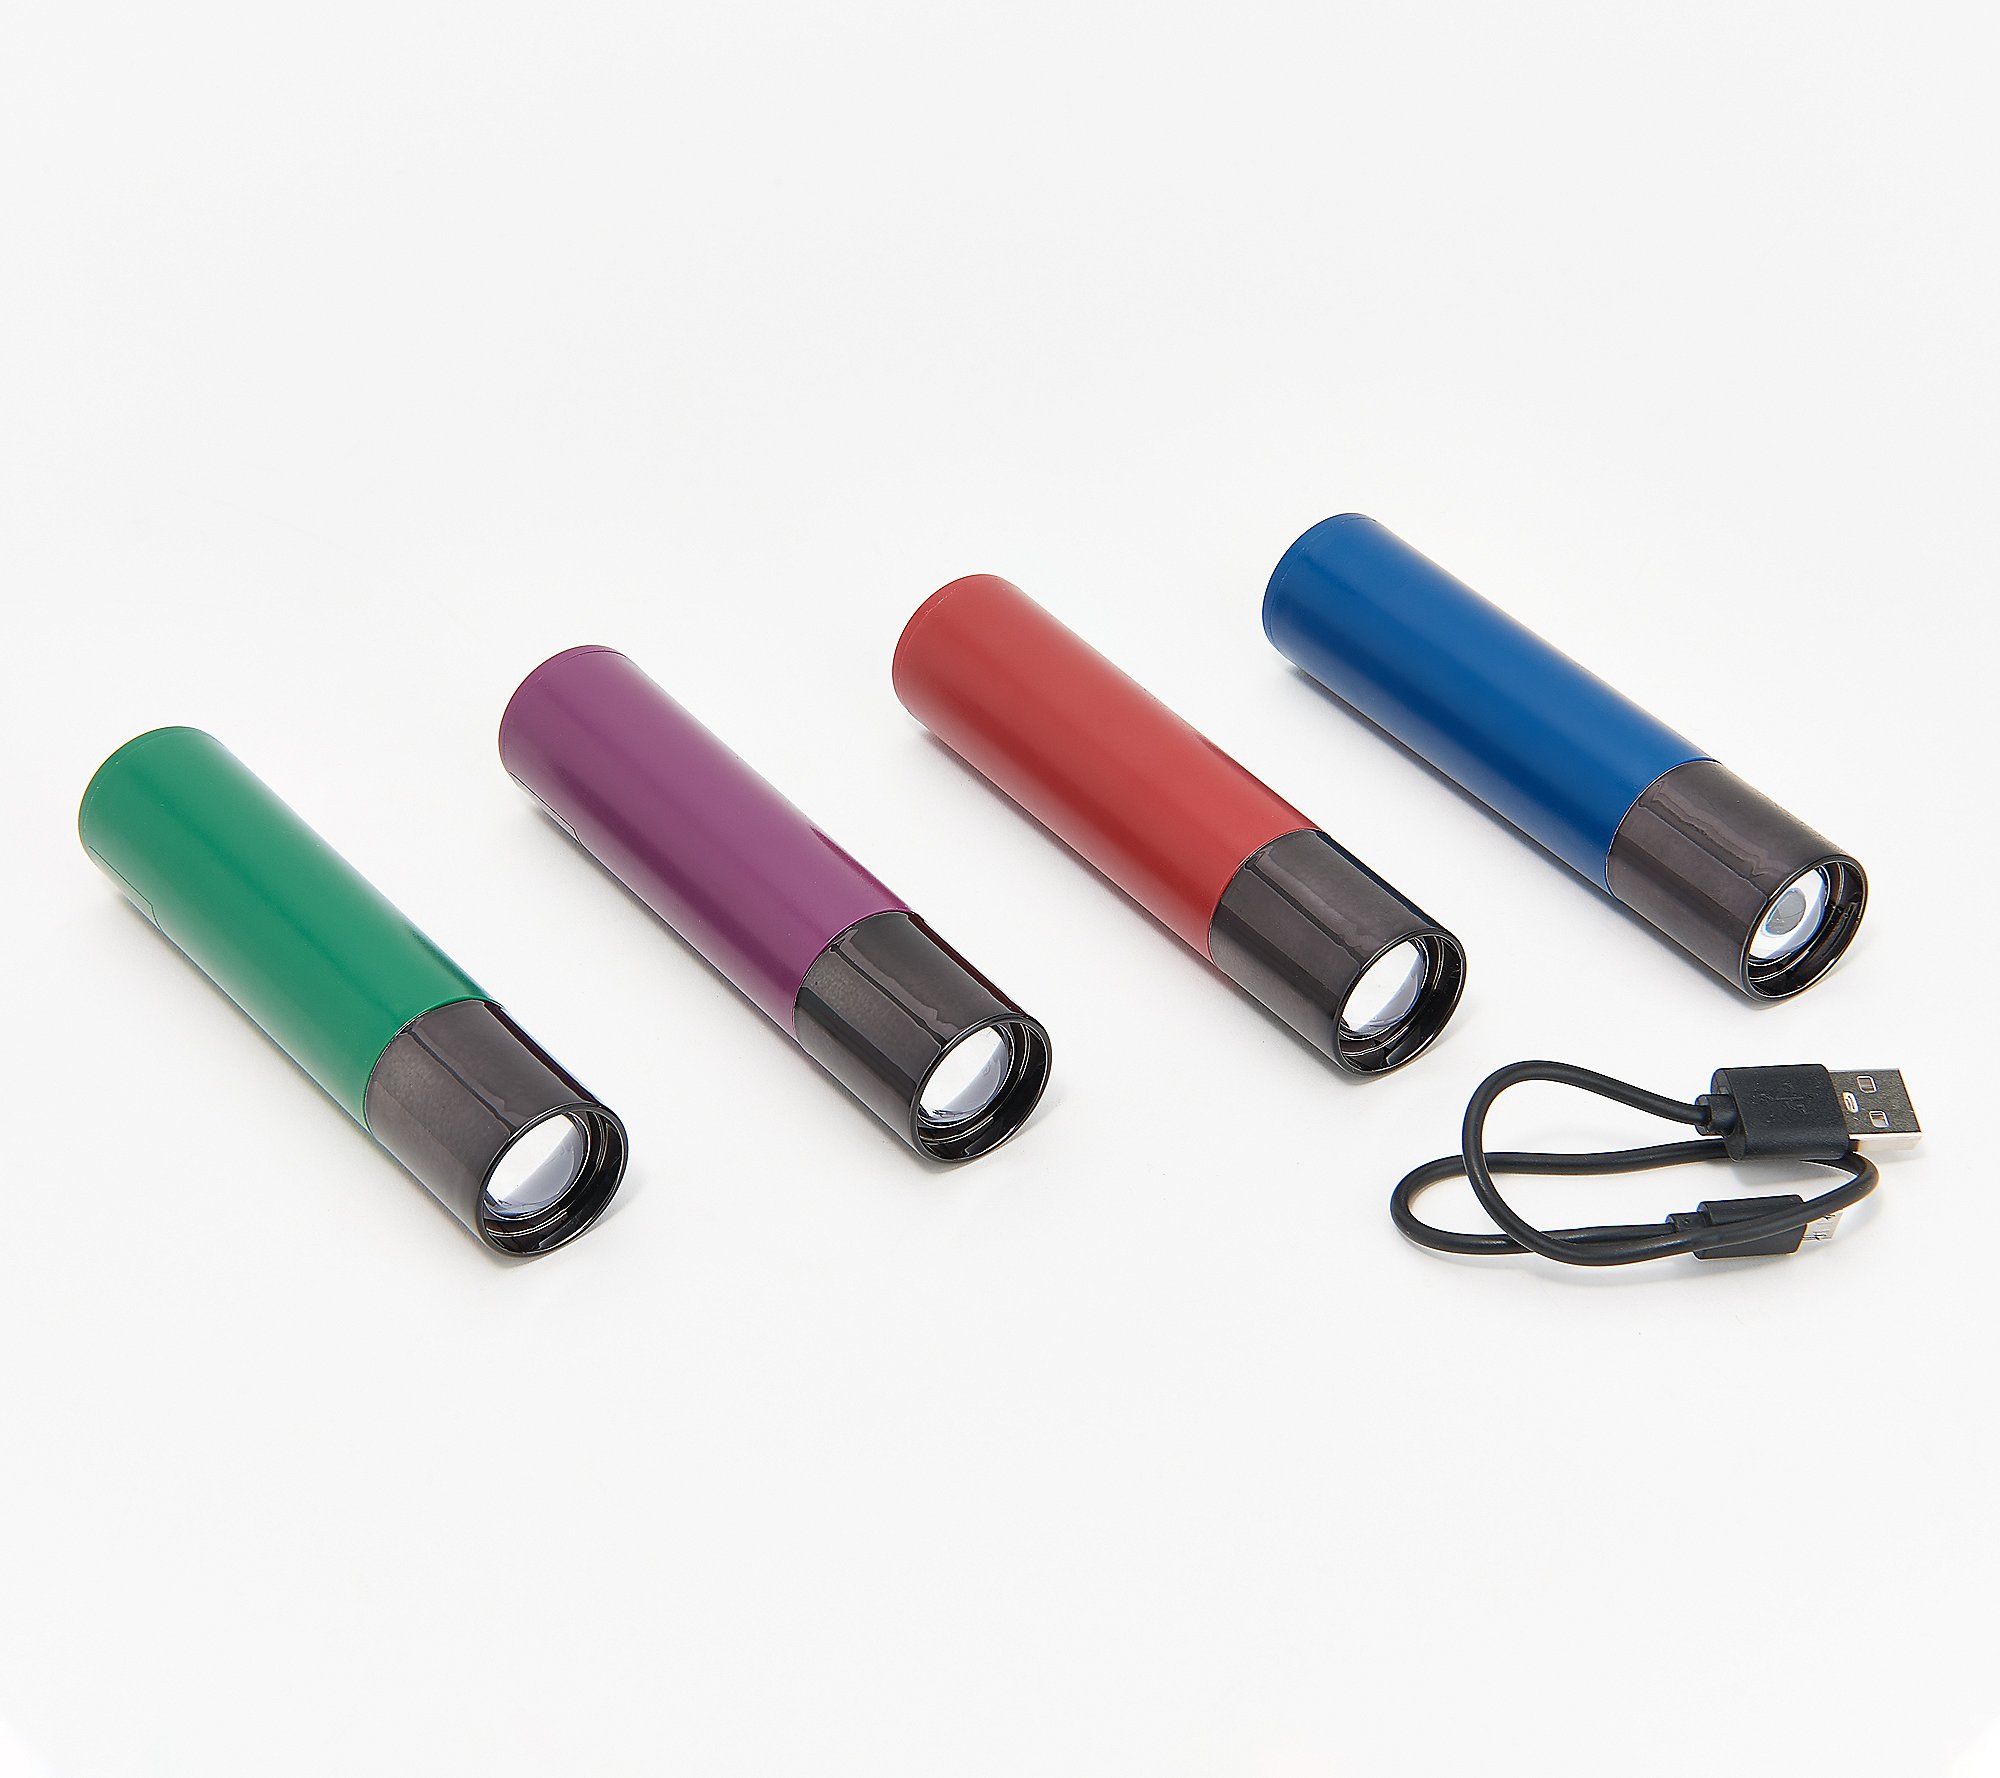 As Is BrightEase Set of 4 Compact Flashlight and Power Bank